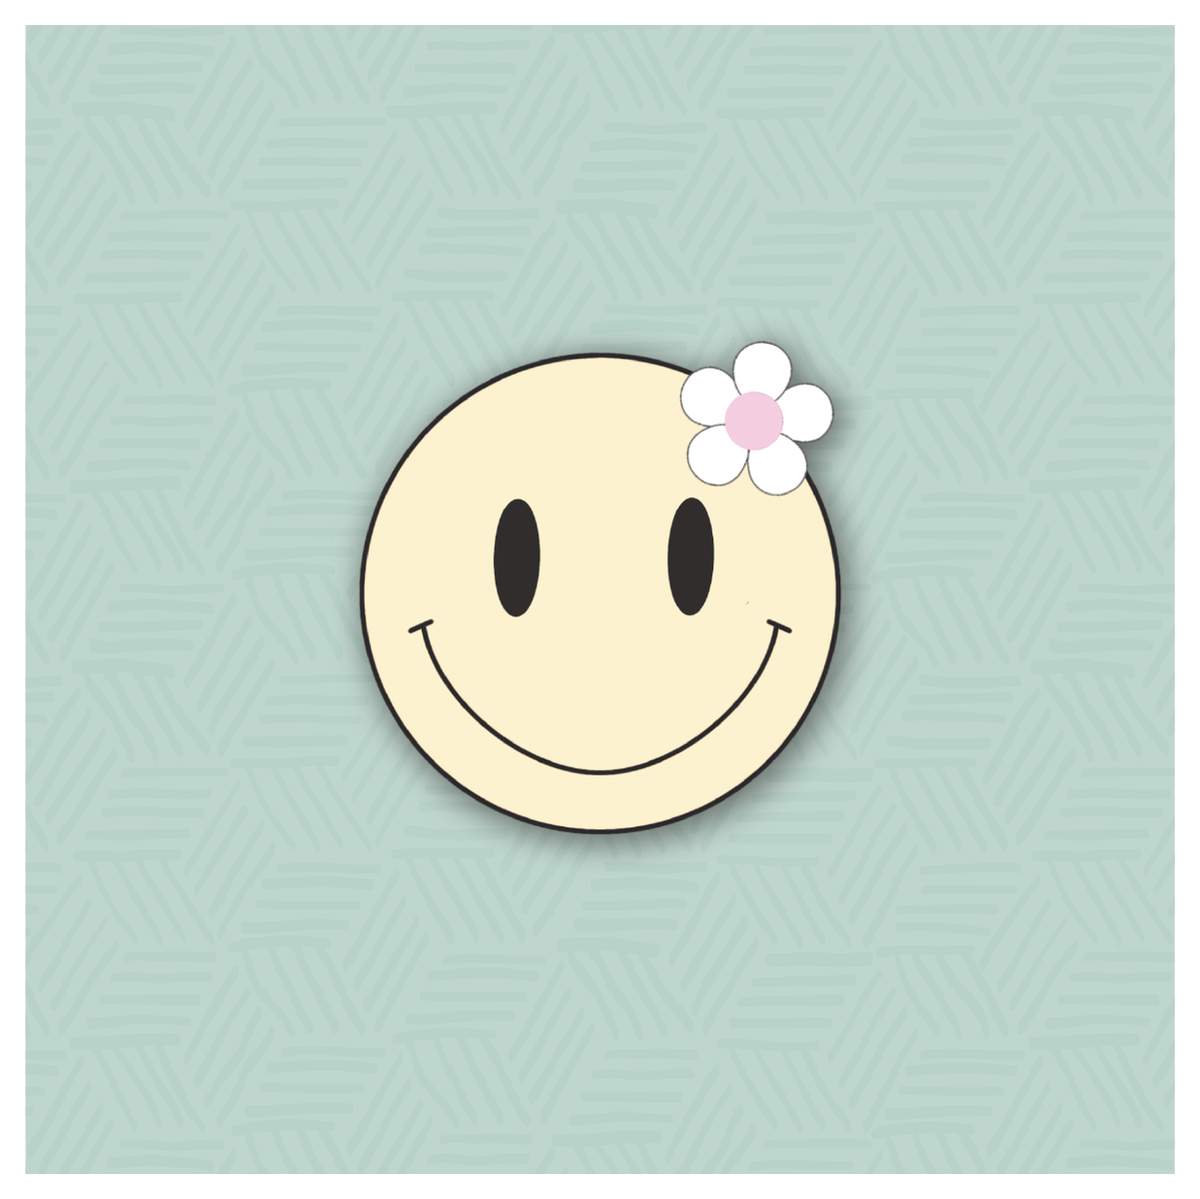 Daisy Smiley Cookie Cutter